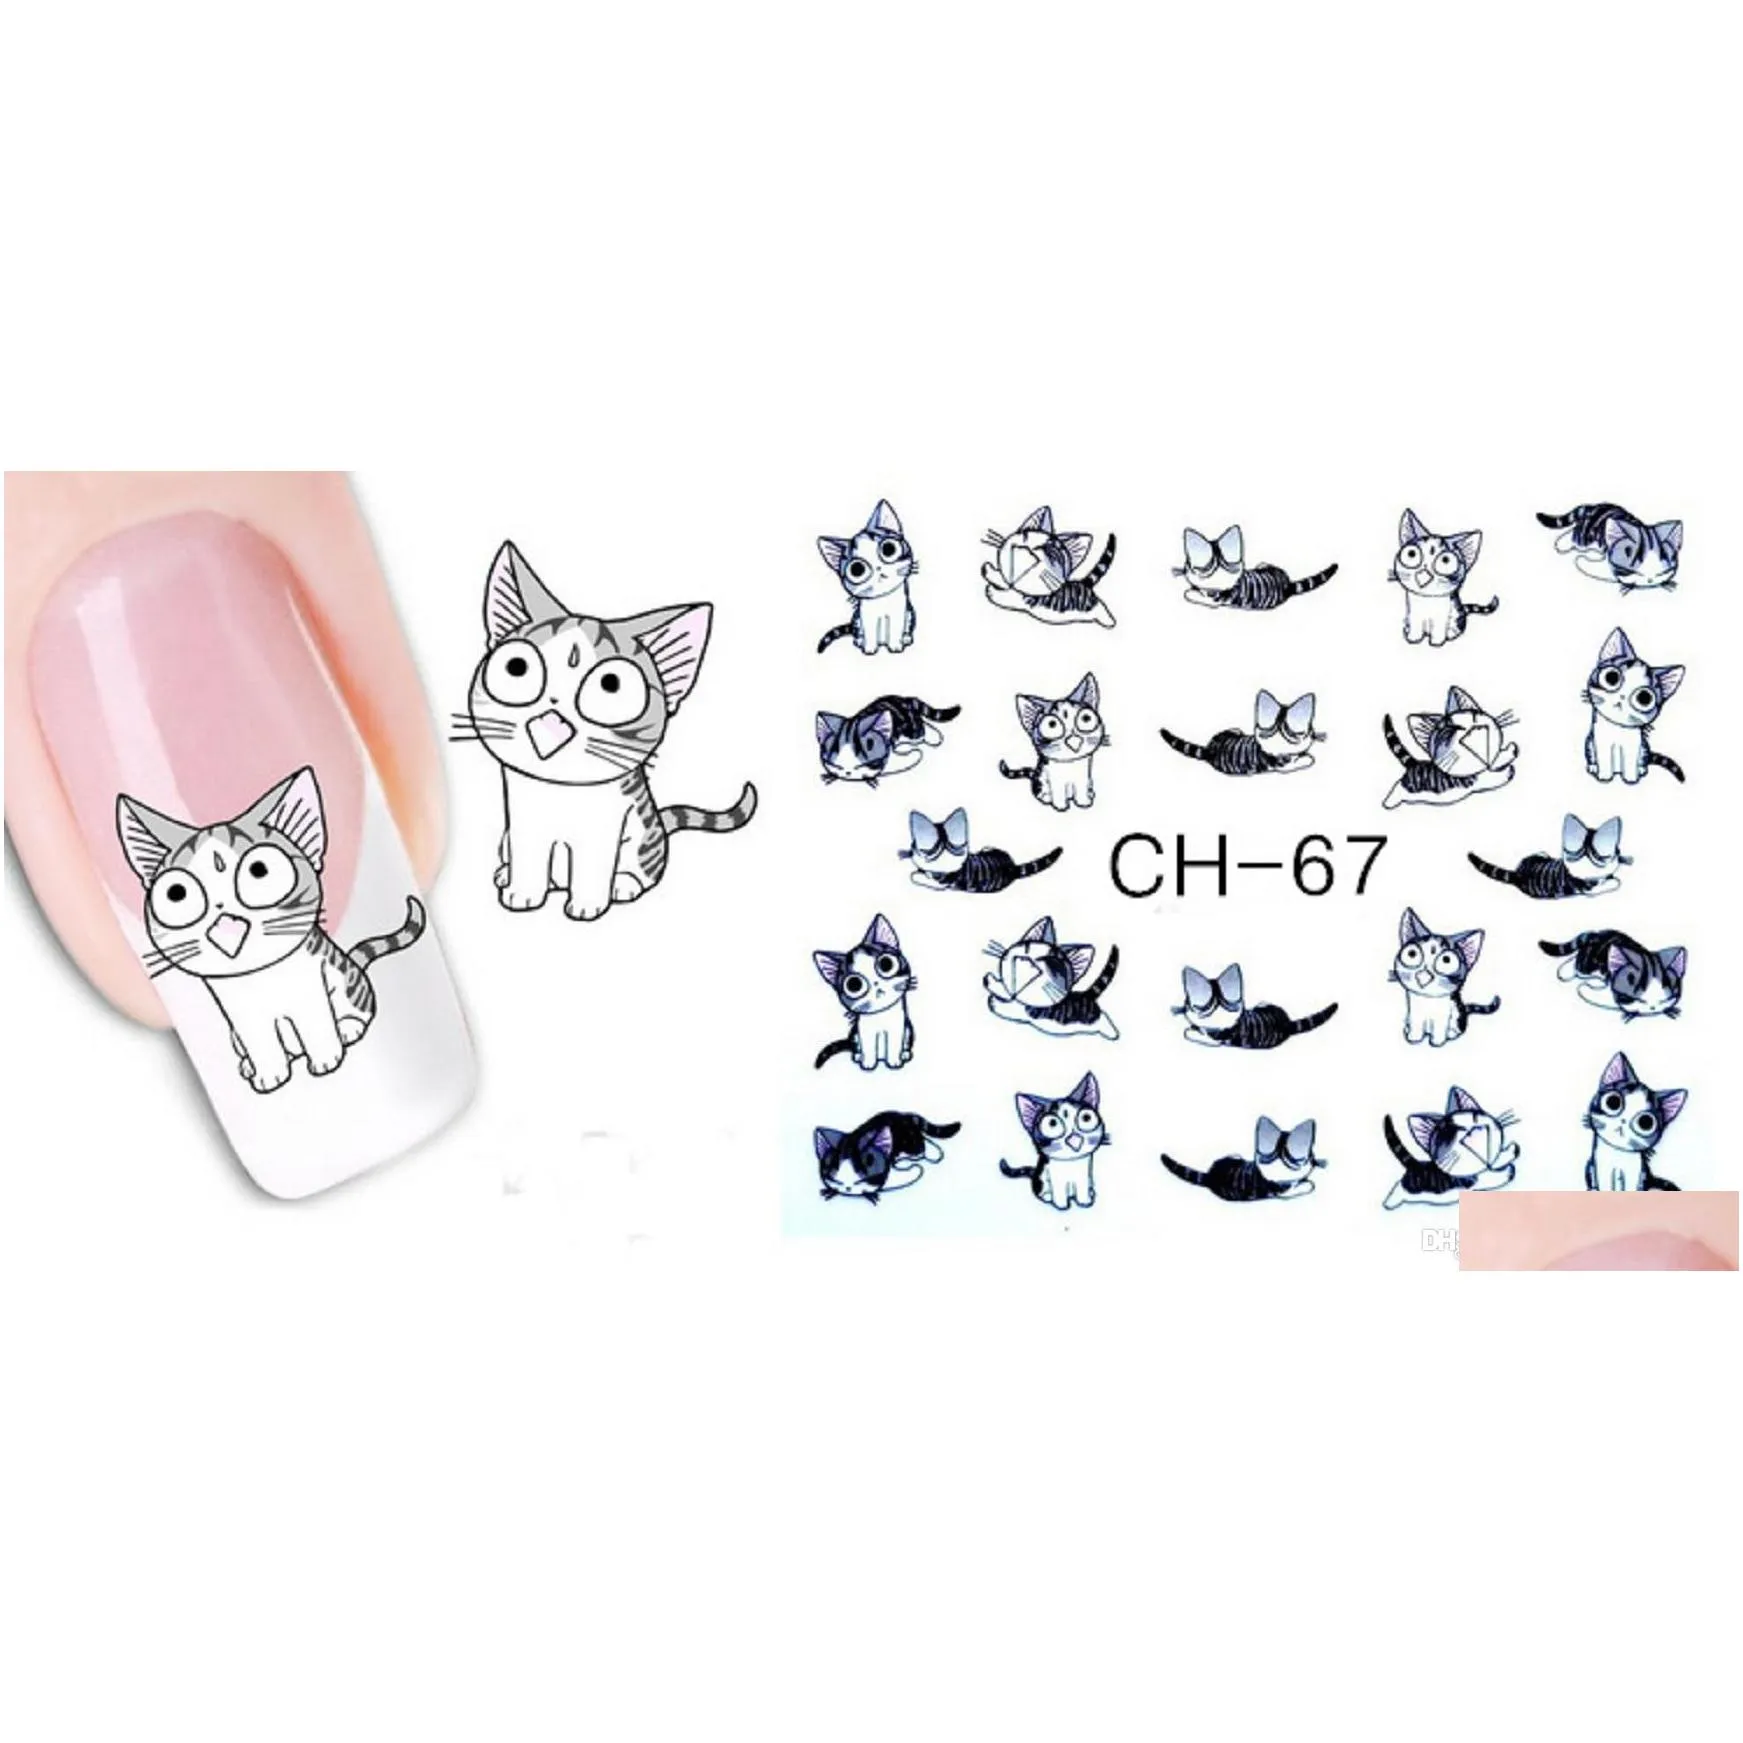 nail beauty salon diy design cartoon cat water transfer nail art sticker nail for decorate easy apply and remove